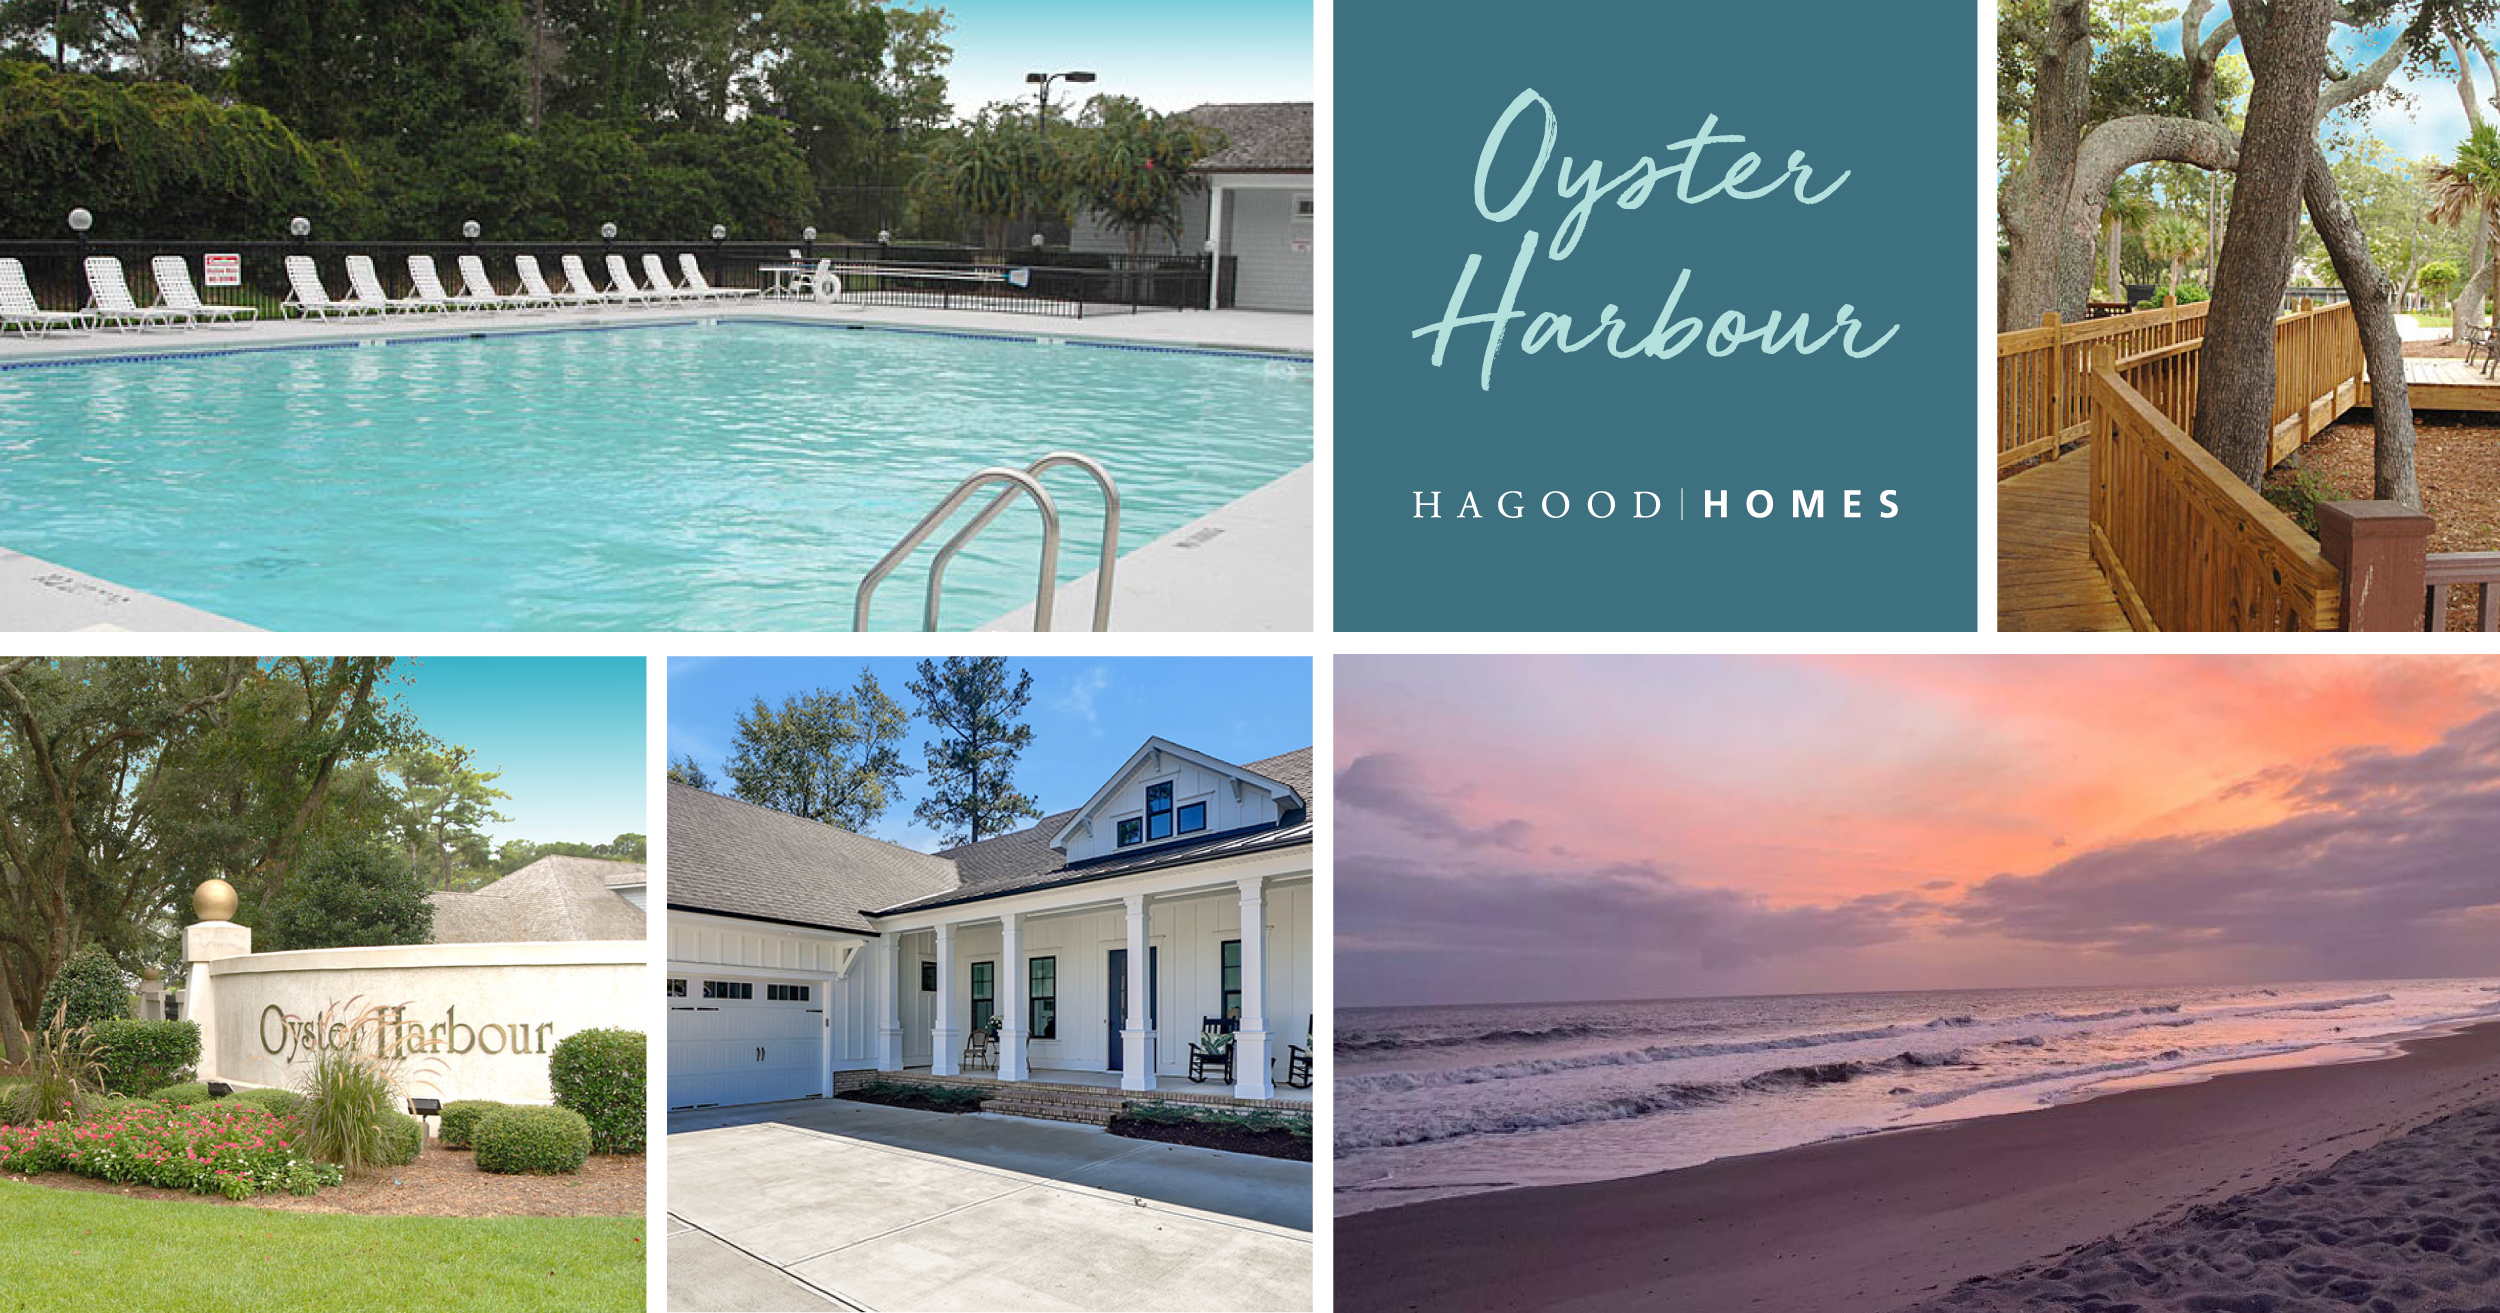 Hagood Homes is Now Building Along the Intracoastal Waterway in Oyster Harbour!